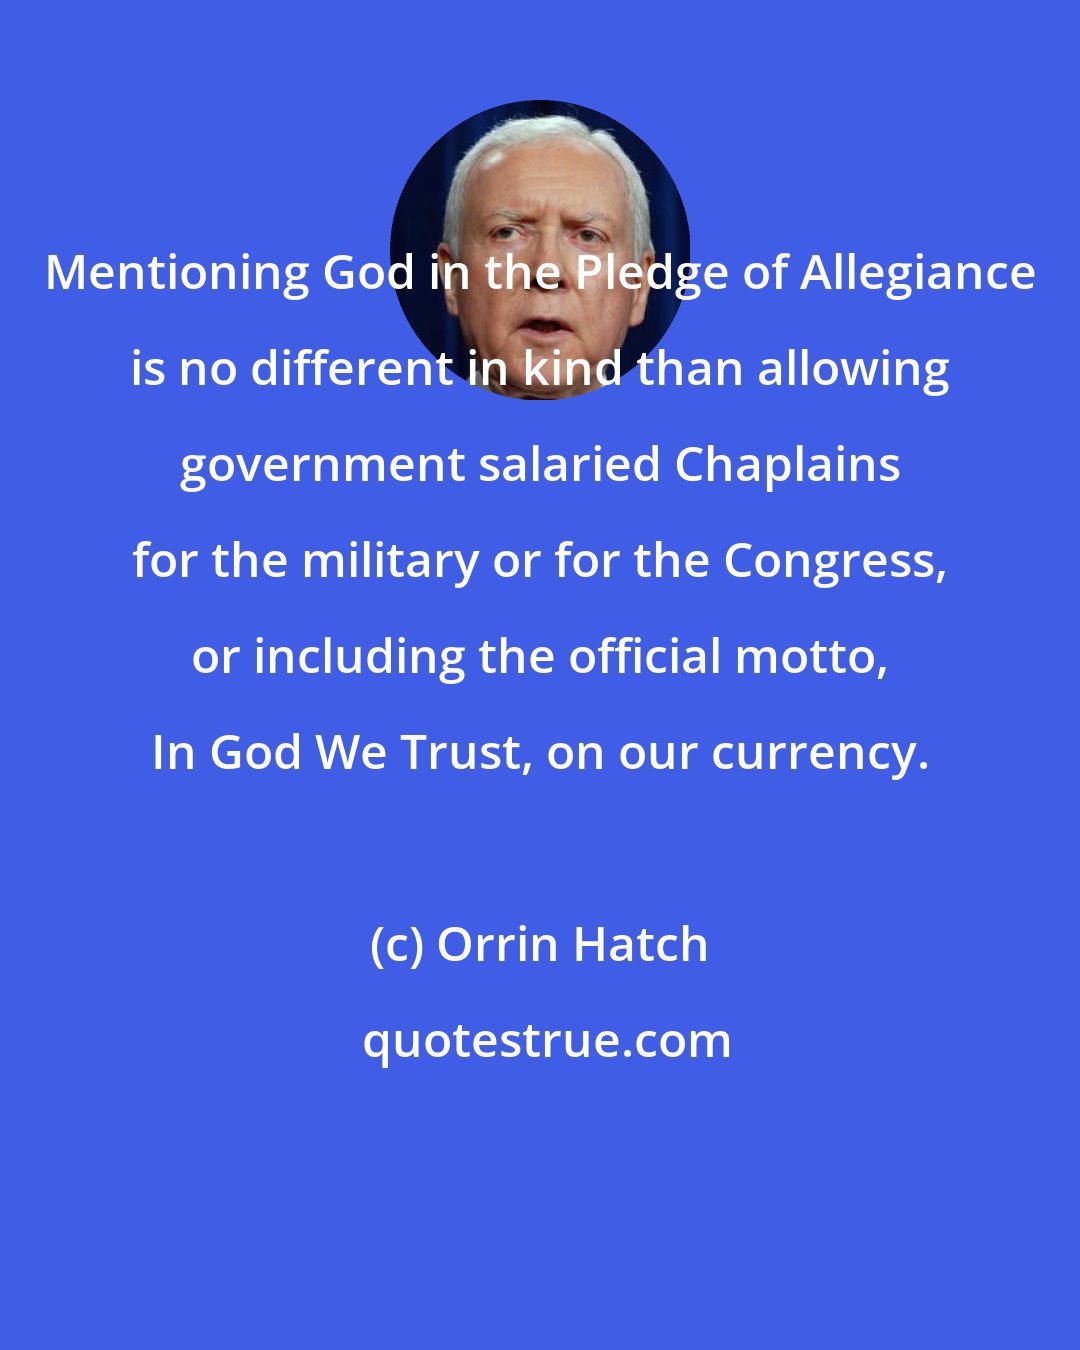 Orrin Hatch: Mentioning God in the Pledge of Allegiance is no different in kind than allowing government salaried Chaplains for the military or for the Congress, or including the official motto, In God We Trust, on our currency.